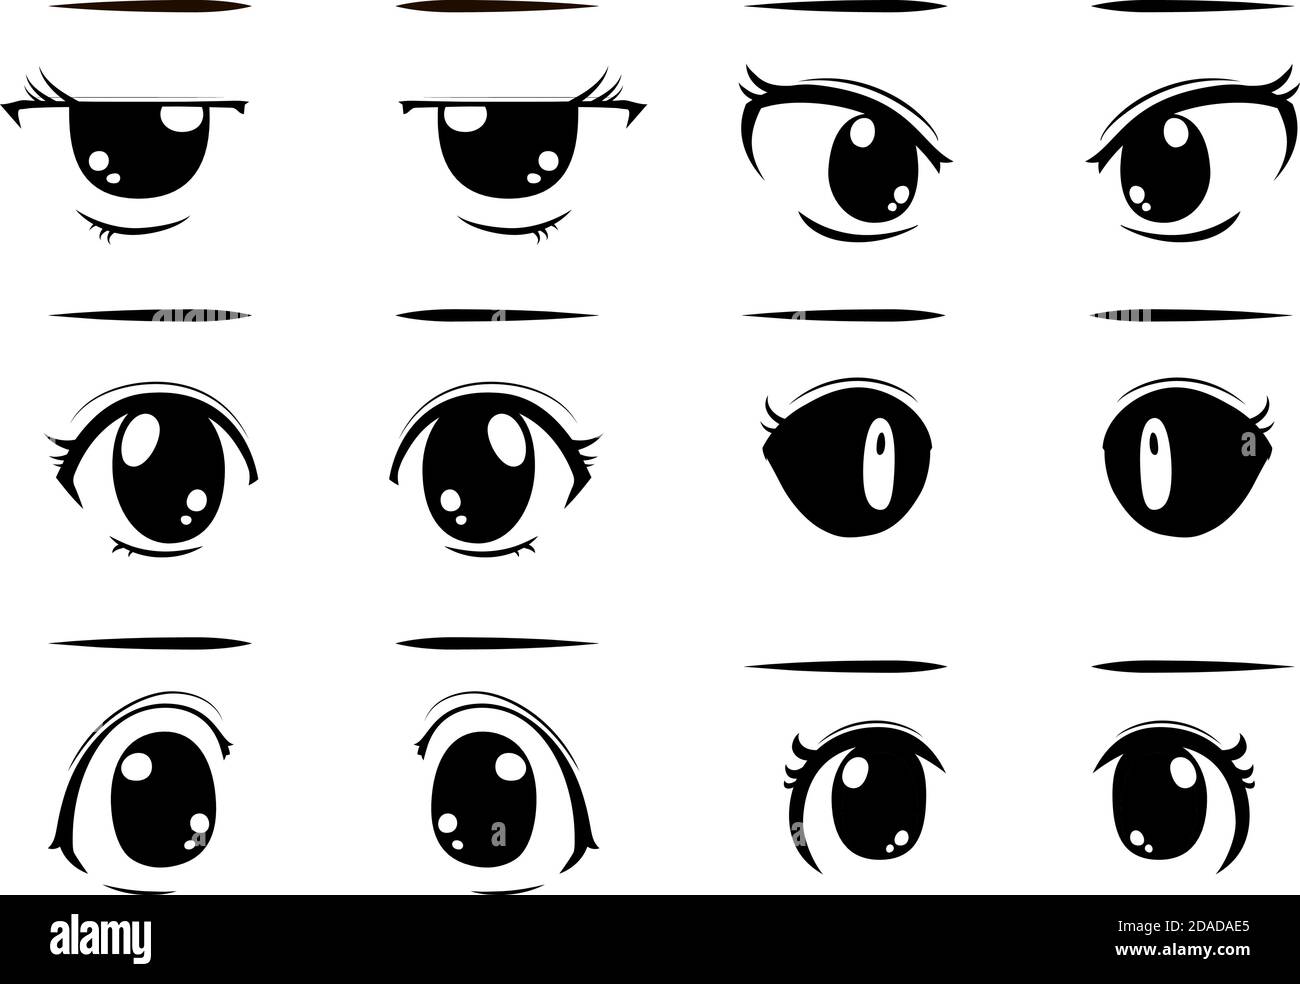 35999 Eyes Anime Images Stock Photos  Vectors  Shutterstock